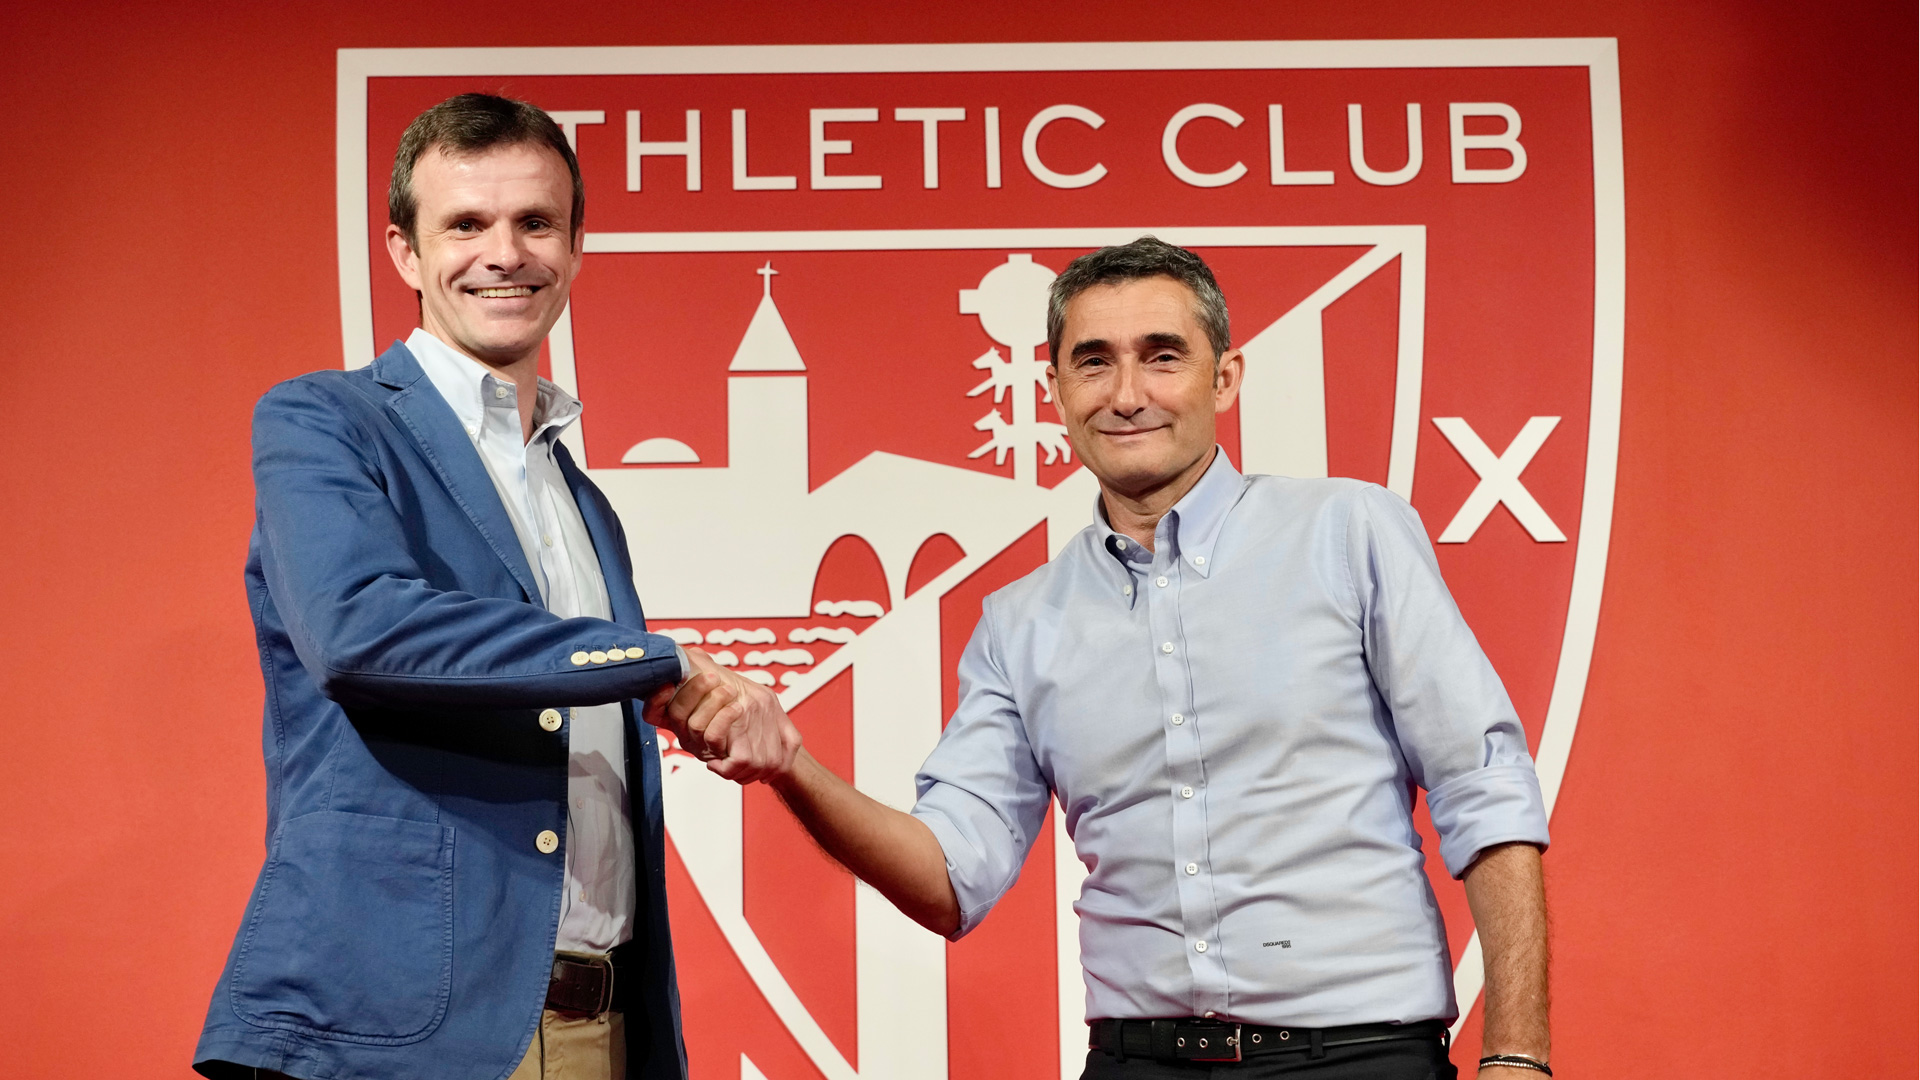 Valverde: “Athletic means a lot to me, this is exciting”